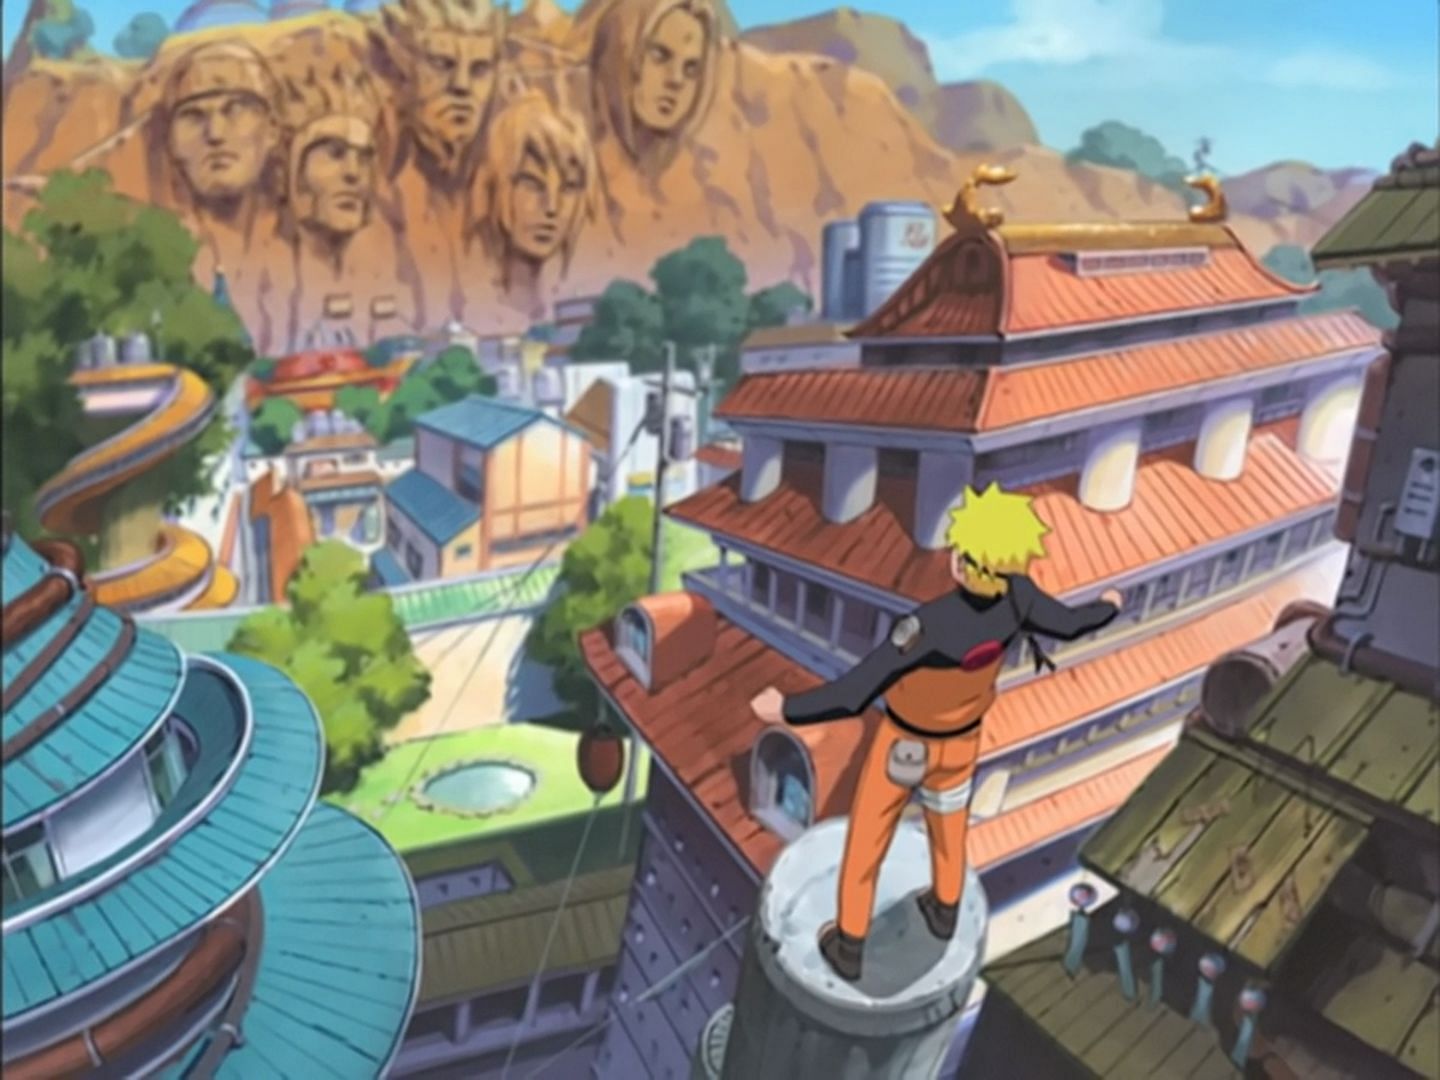 Naruto looks over the leaf, starting off Shippuden and with it the final steps in his journey to becoming a Hokage (Image via Studio Pierrot)